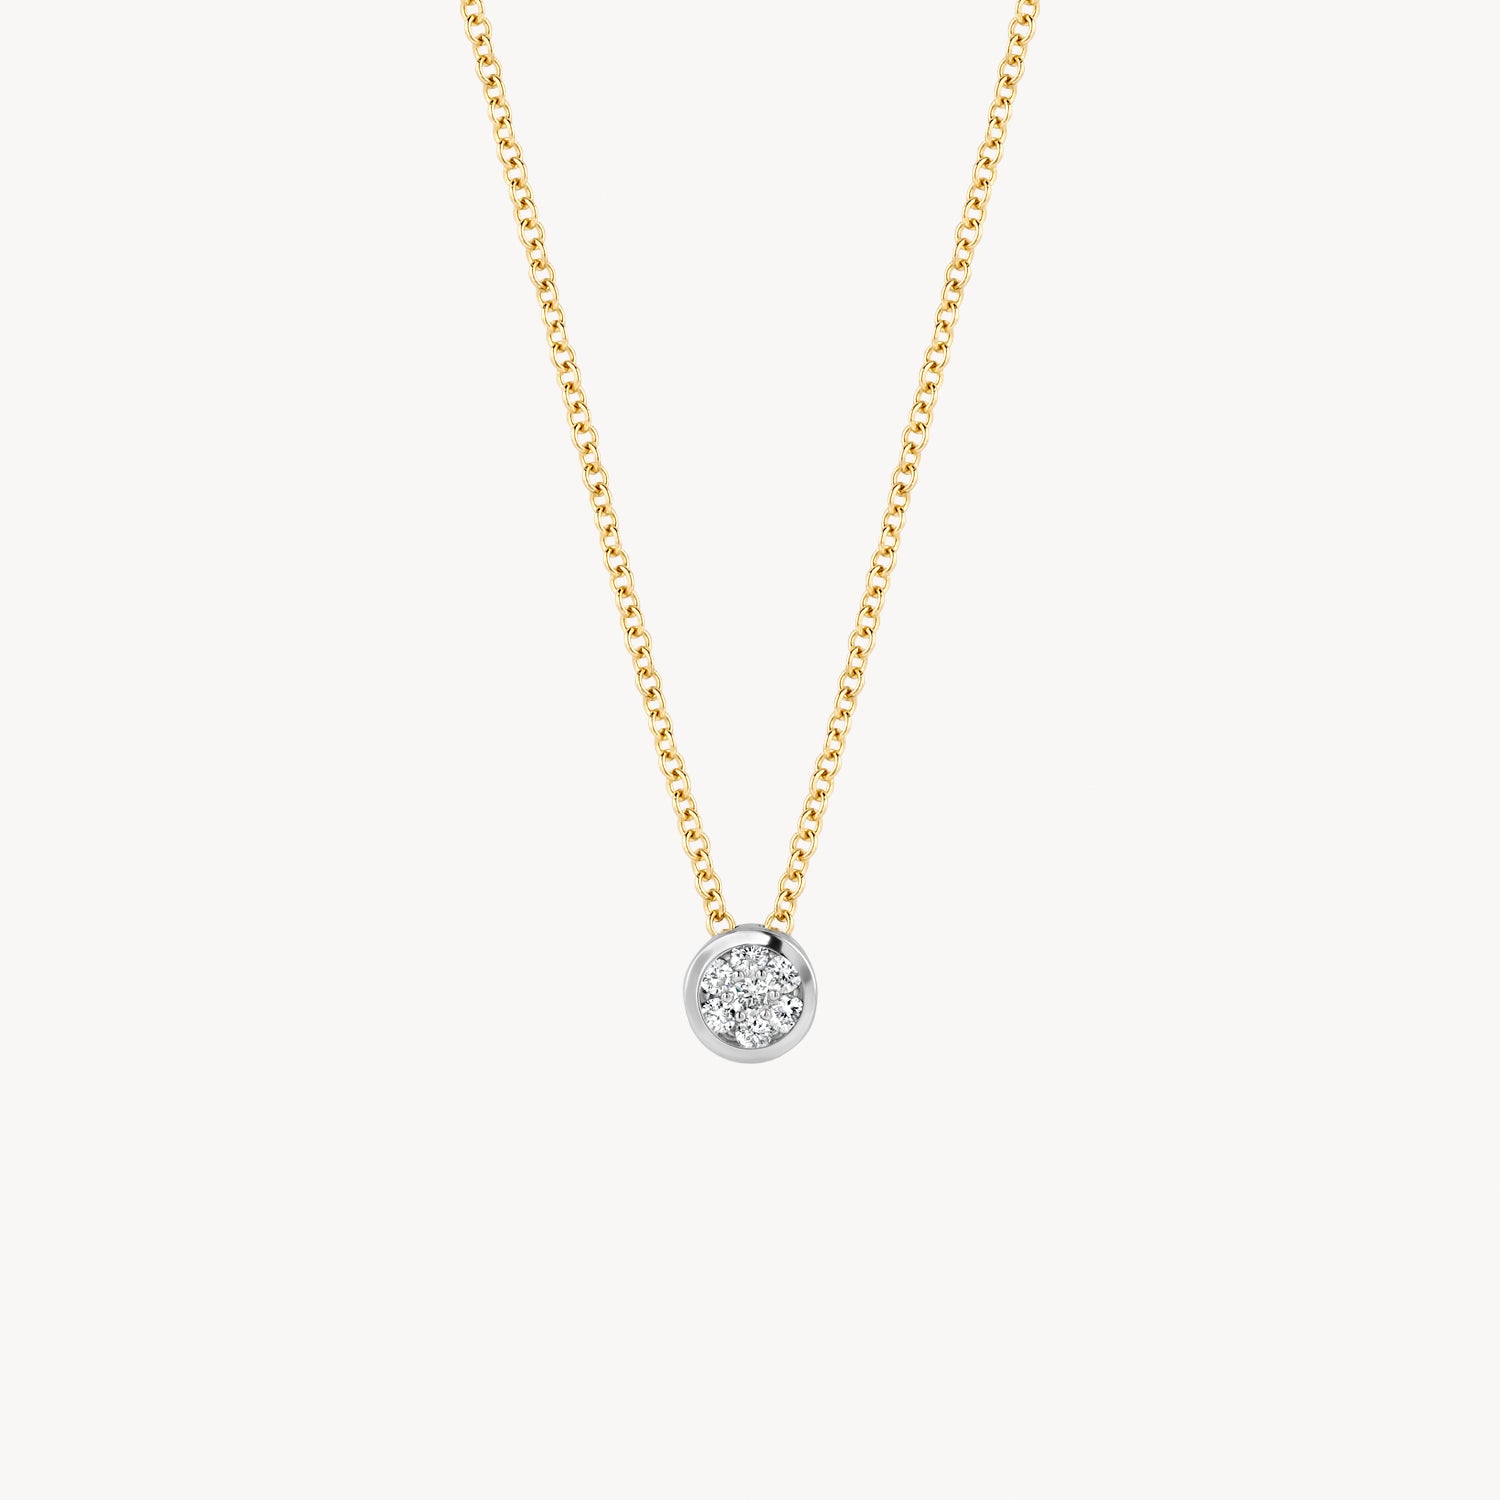 Necklace 3600BDI - 14k Yellow and White Gold with diamond